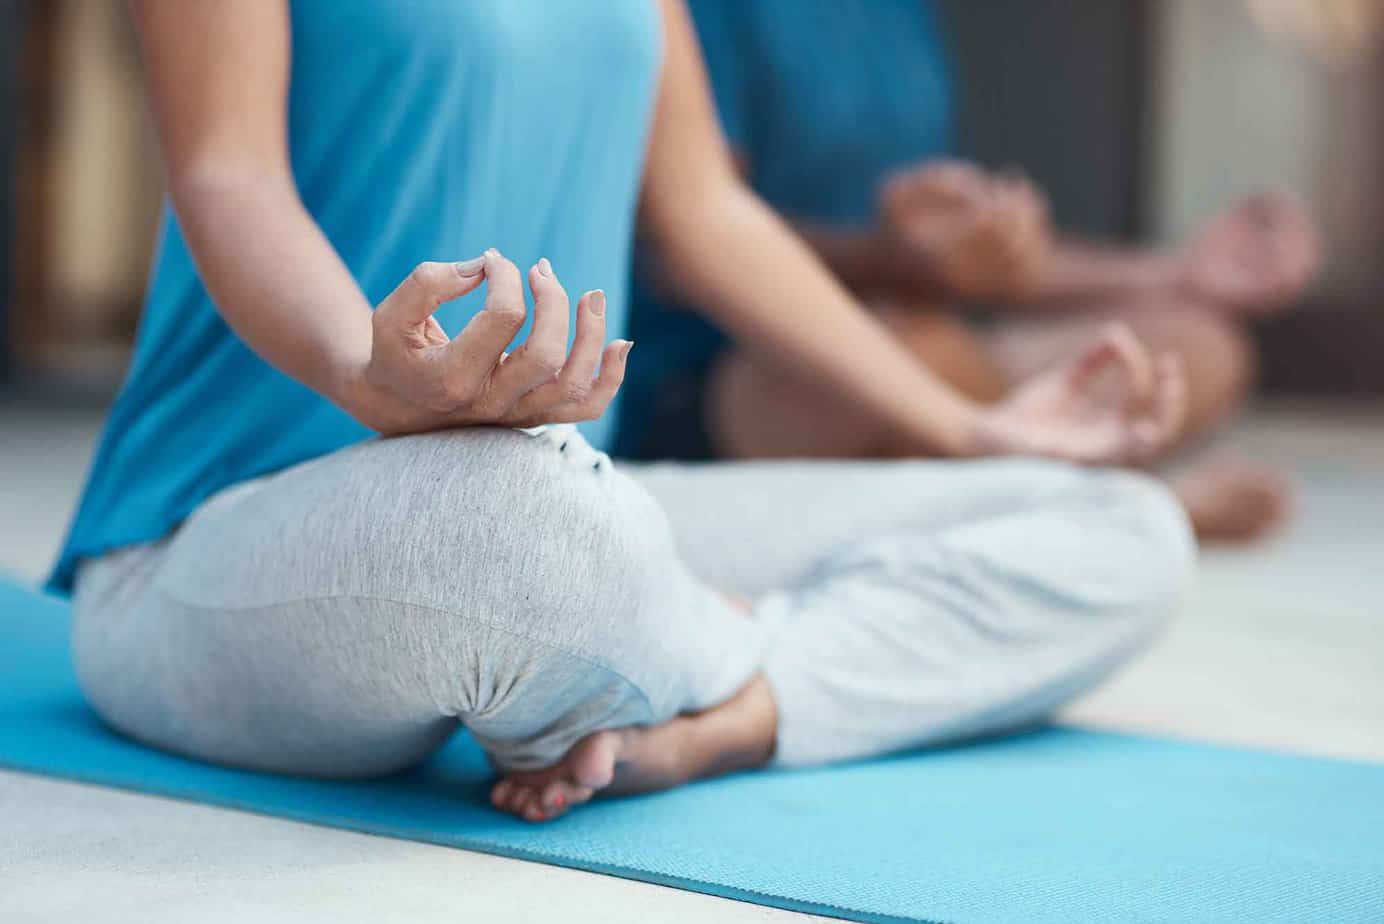 A woman in a blue shirt with gray sweatpants meditating in a drug rehab yoga class.